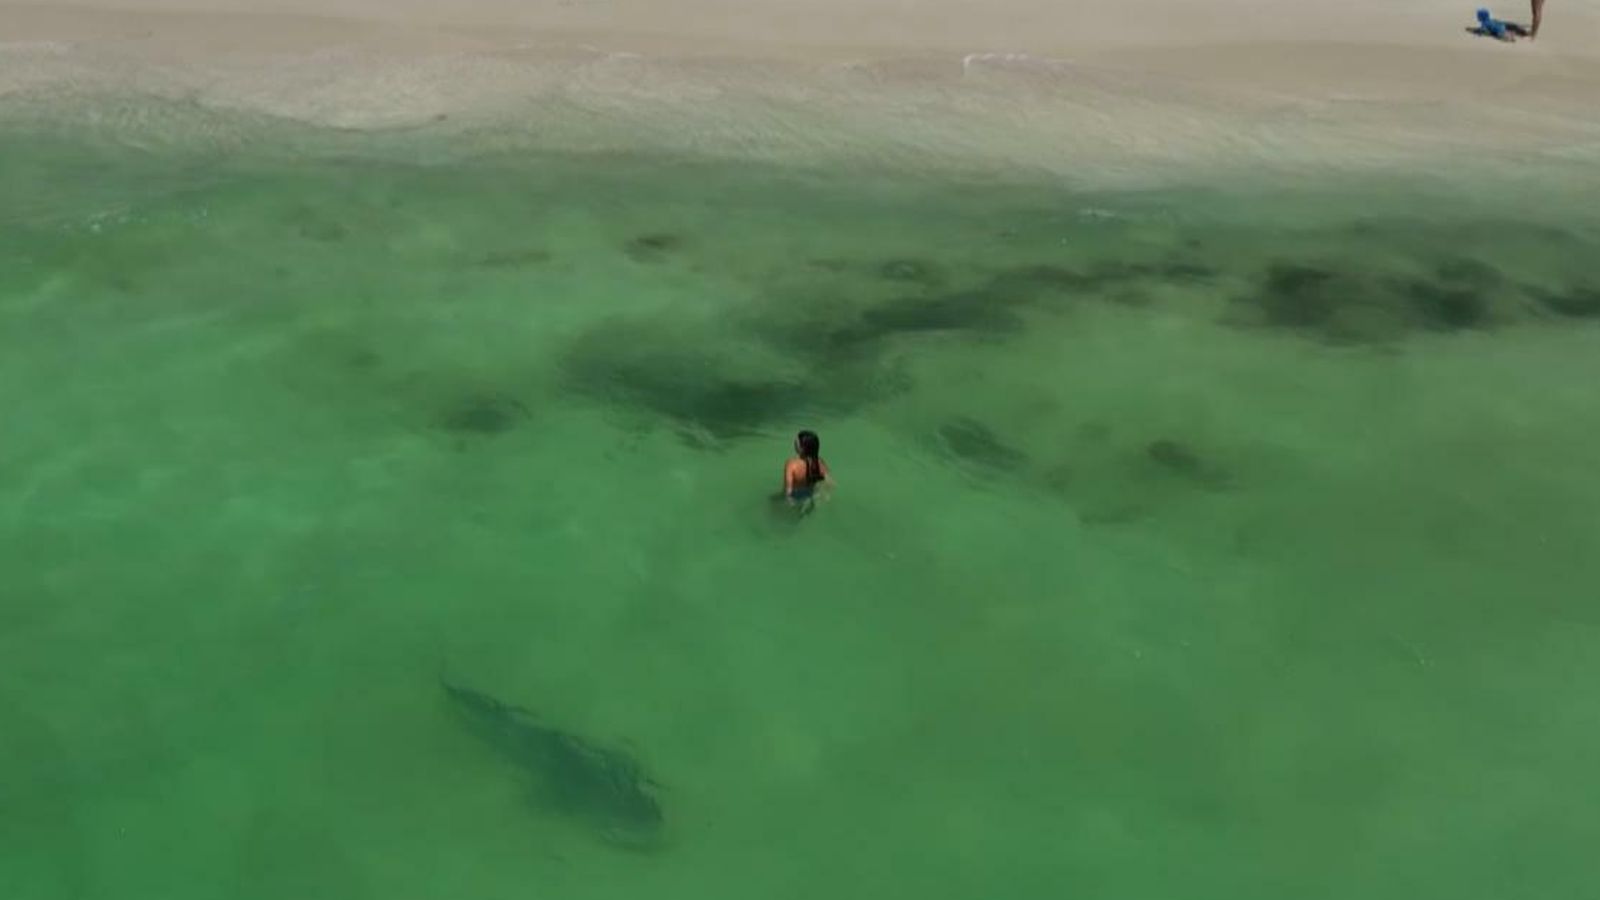 Australia: Tiger shark spotted just metres from oblivious swimmers | World News